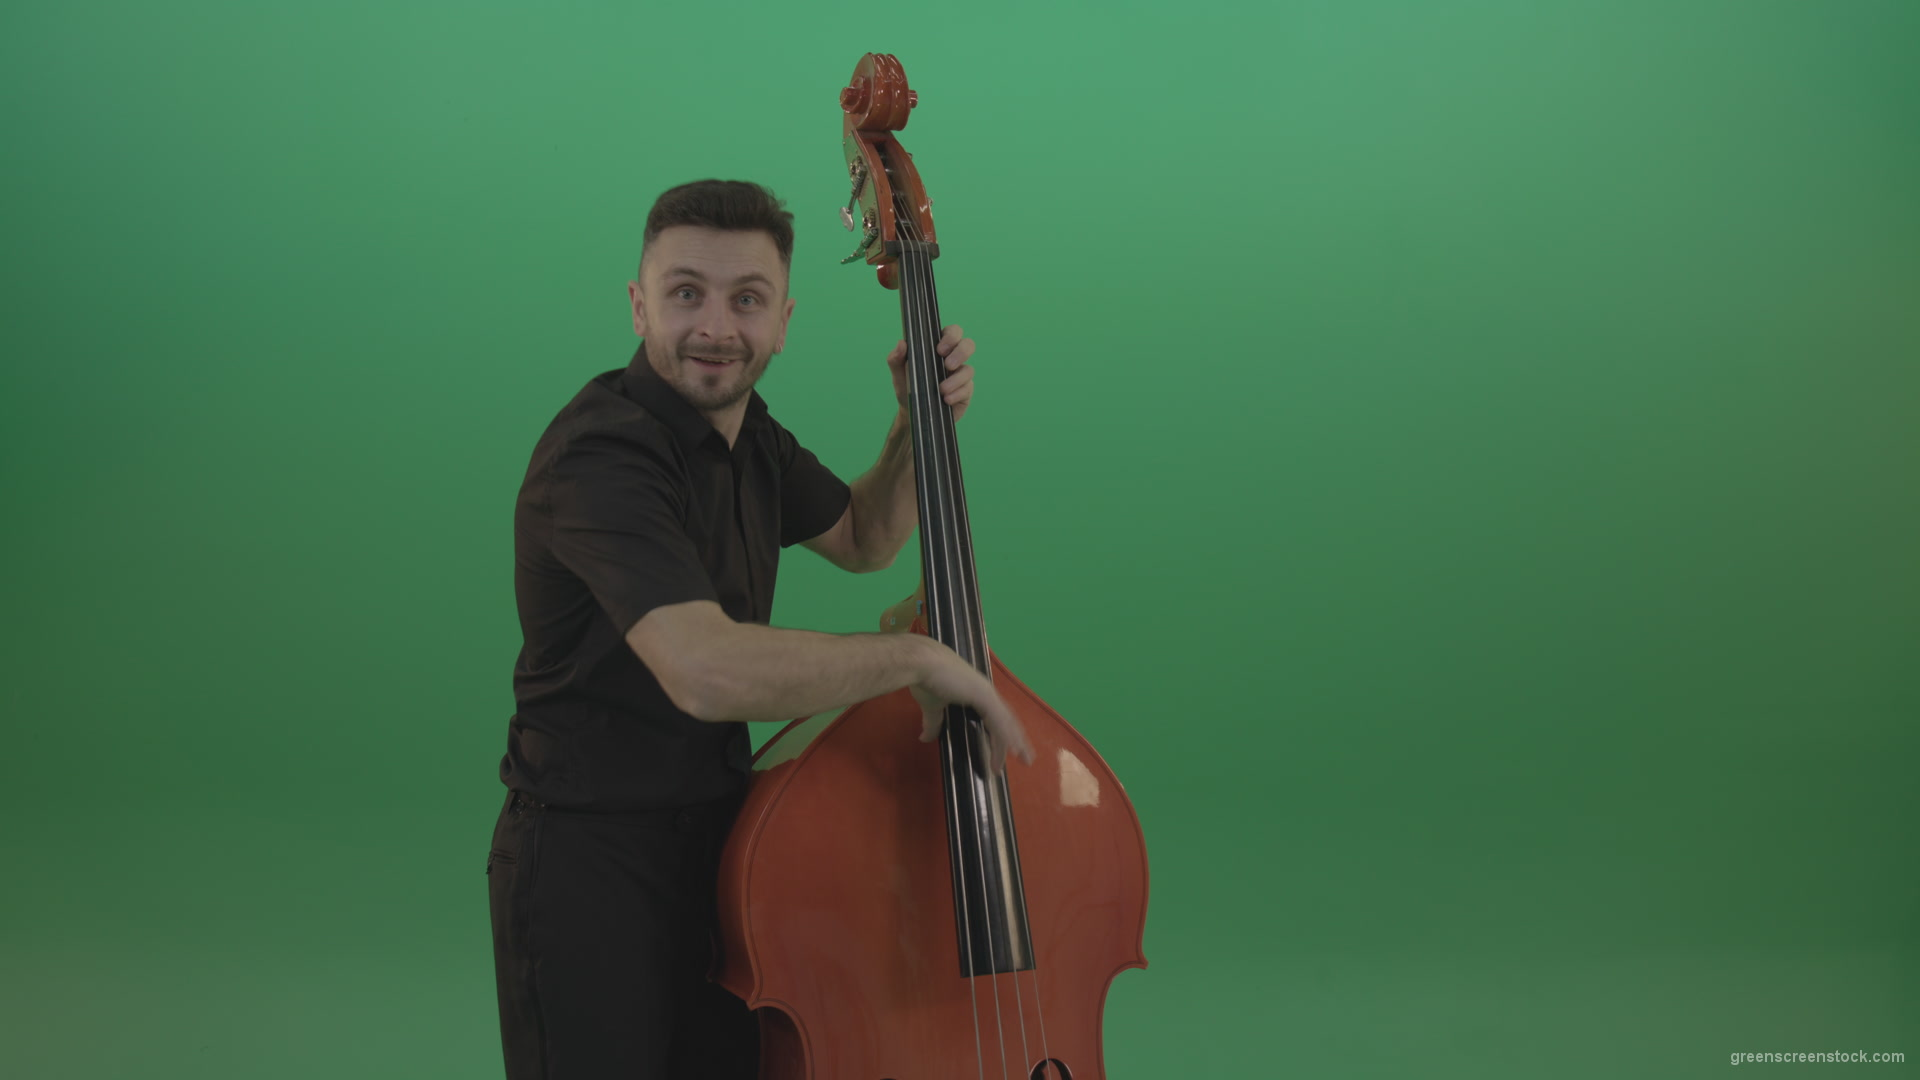 Funny-happy-man-with-smile-playing-jazz-on-double-bass-String-music-instrument-isolated-on-green-screen_005 Green Screen Stock